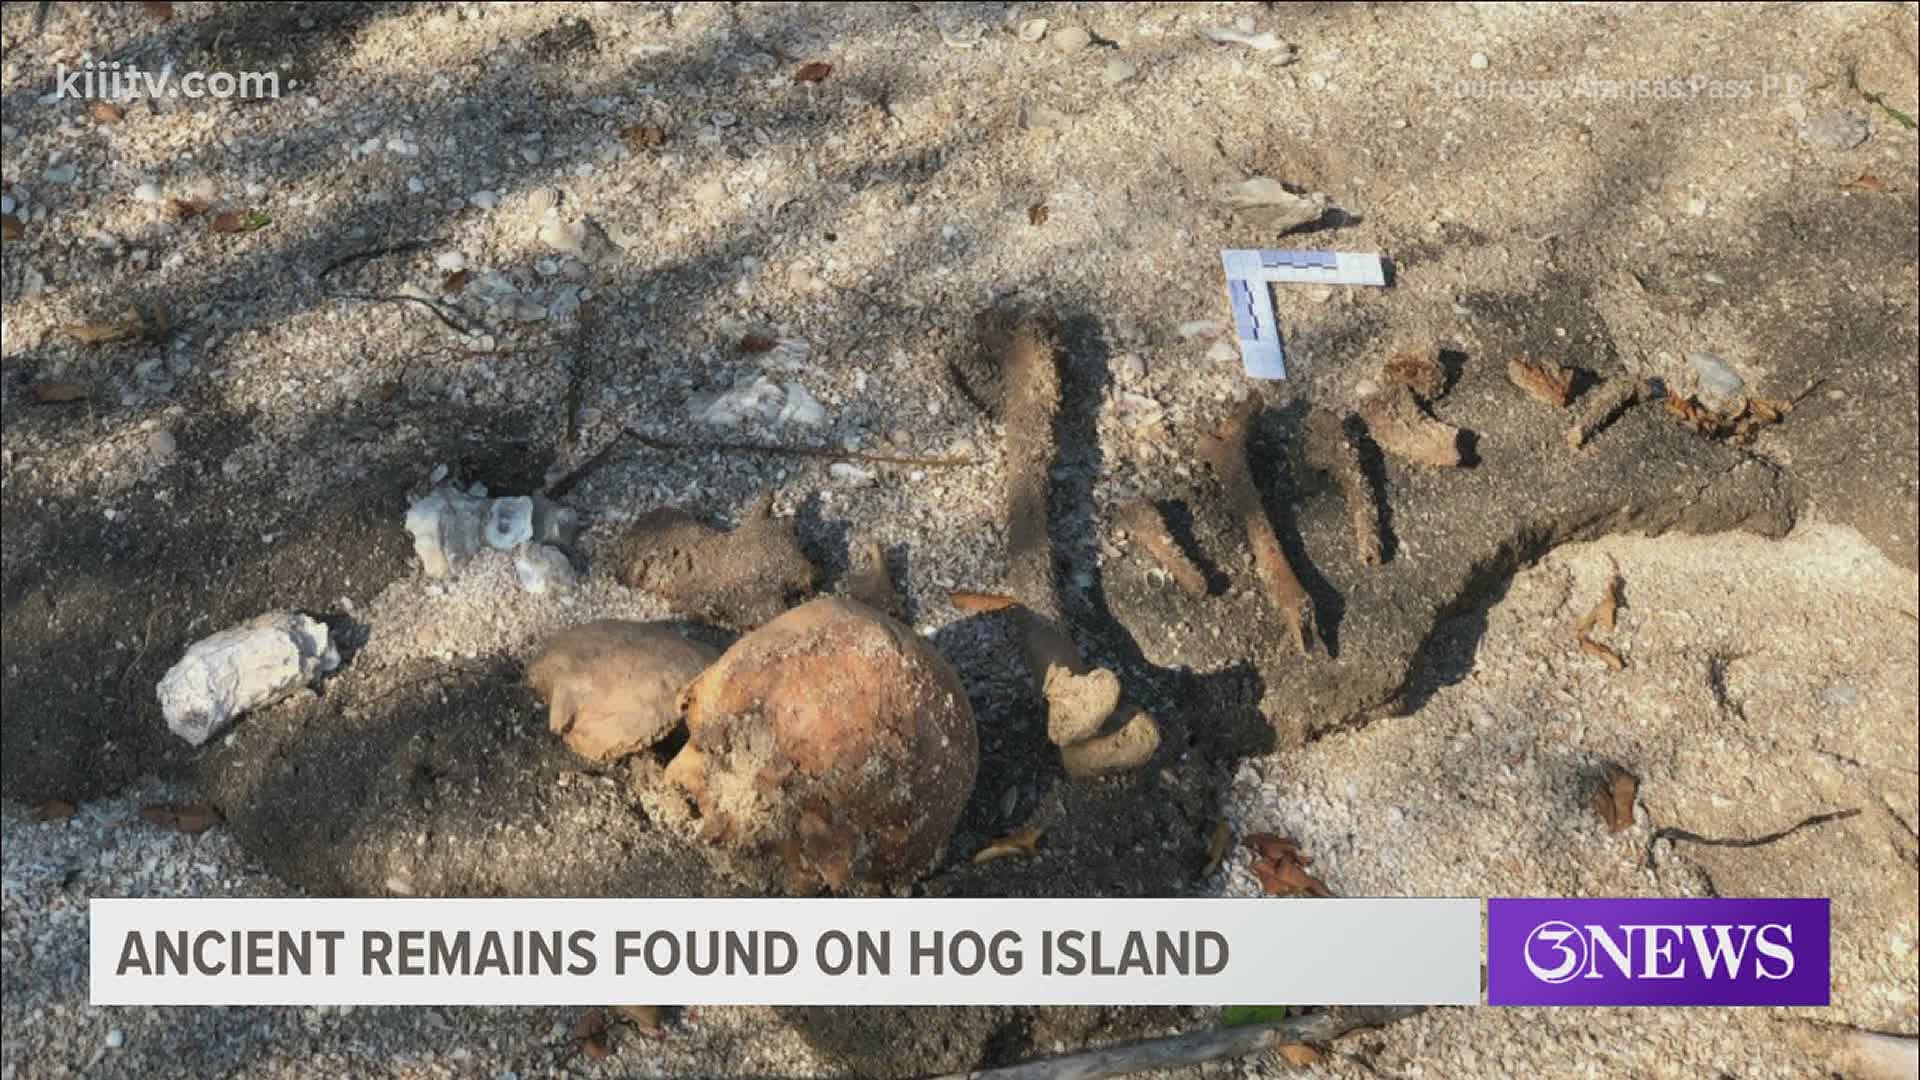 The human remains were found by a fisherman on the island on August 3.